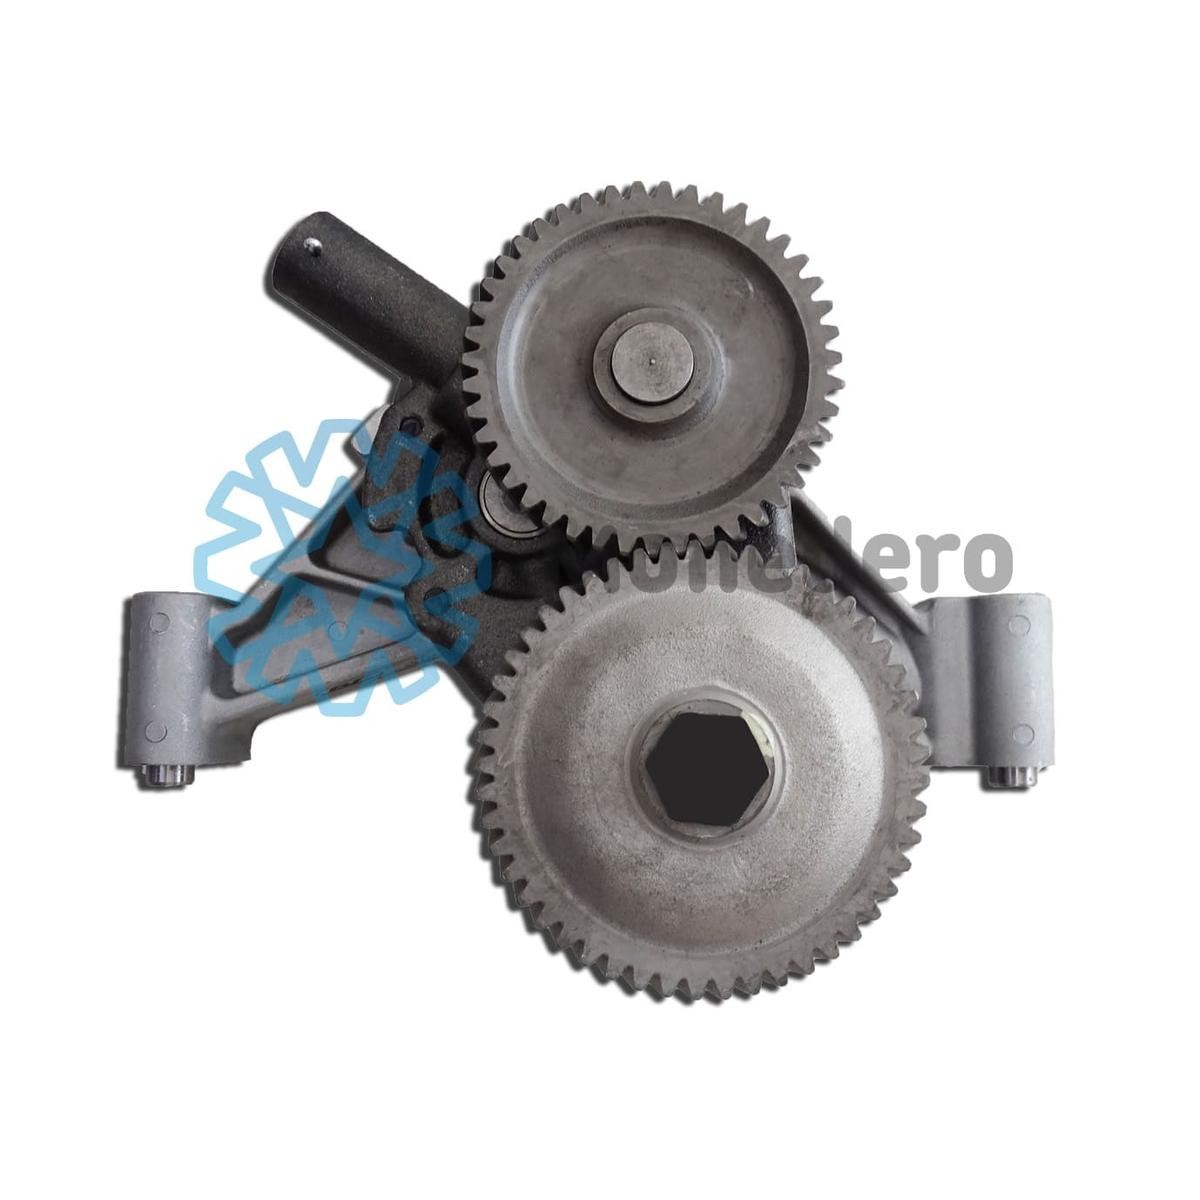 MONEDERO 40016000012 Oil Pump with seal ring